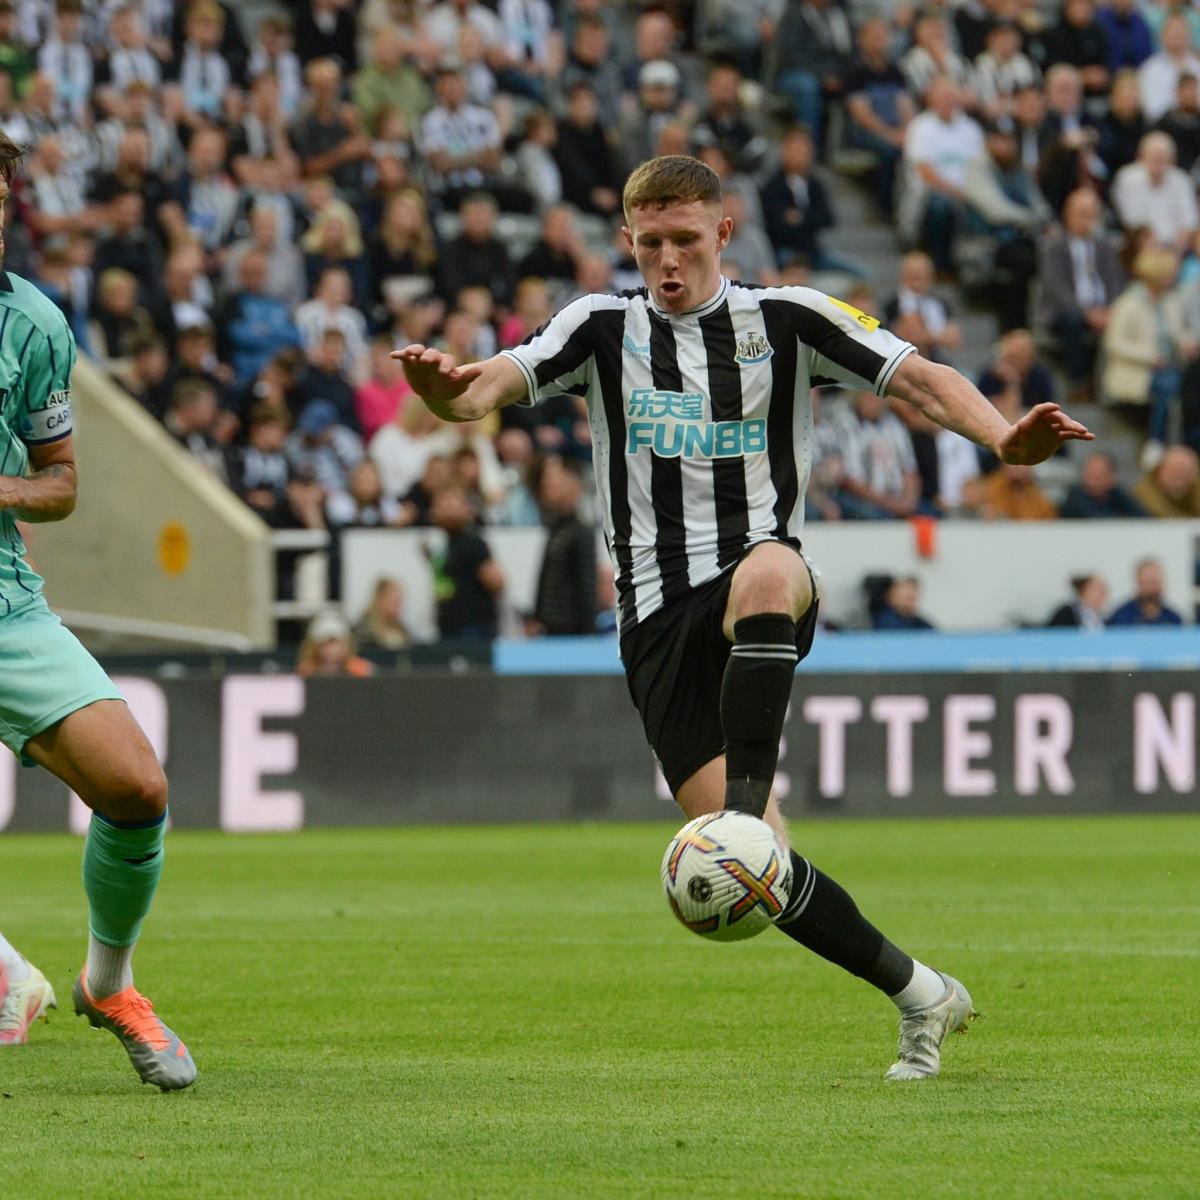 Newcastle in action/Image: NUFC